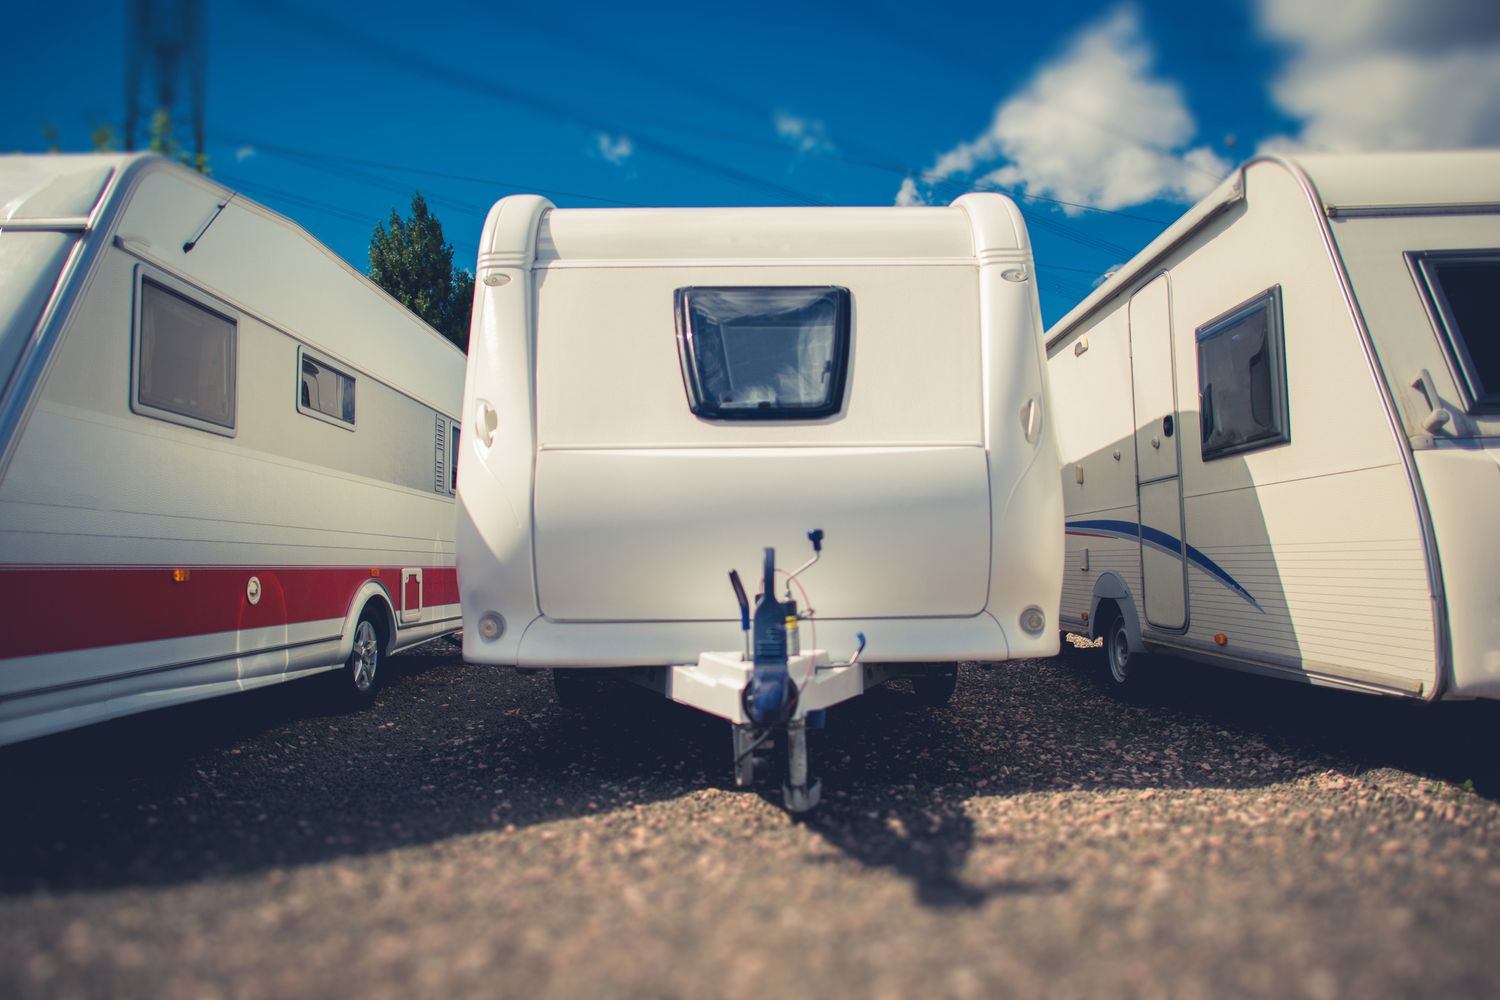 The Best RVs for Sale: How to Score a Deal on Your Dream Home on Wheels